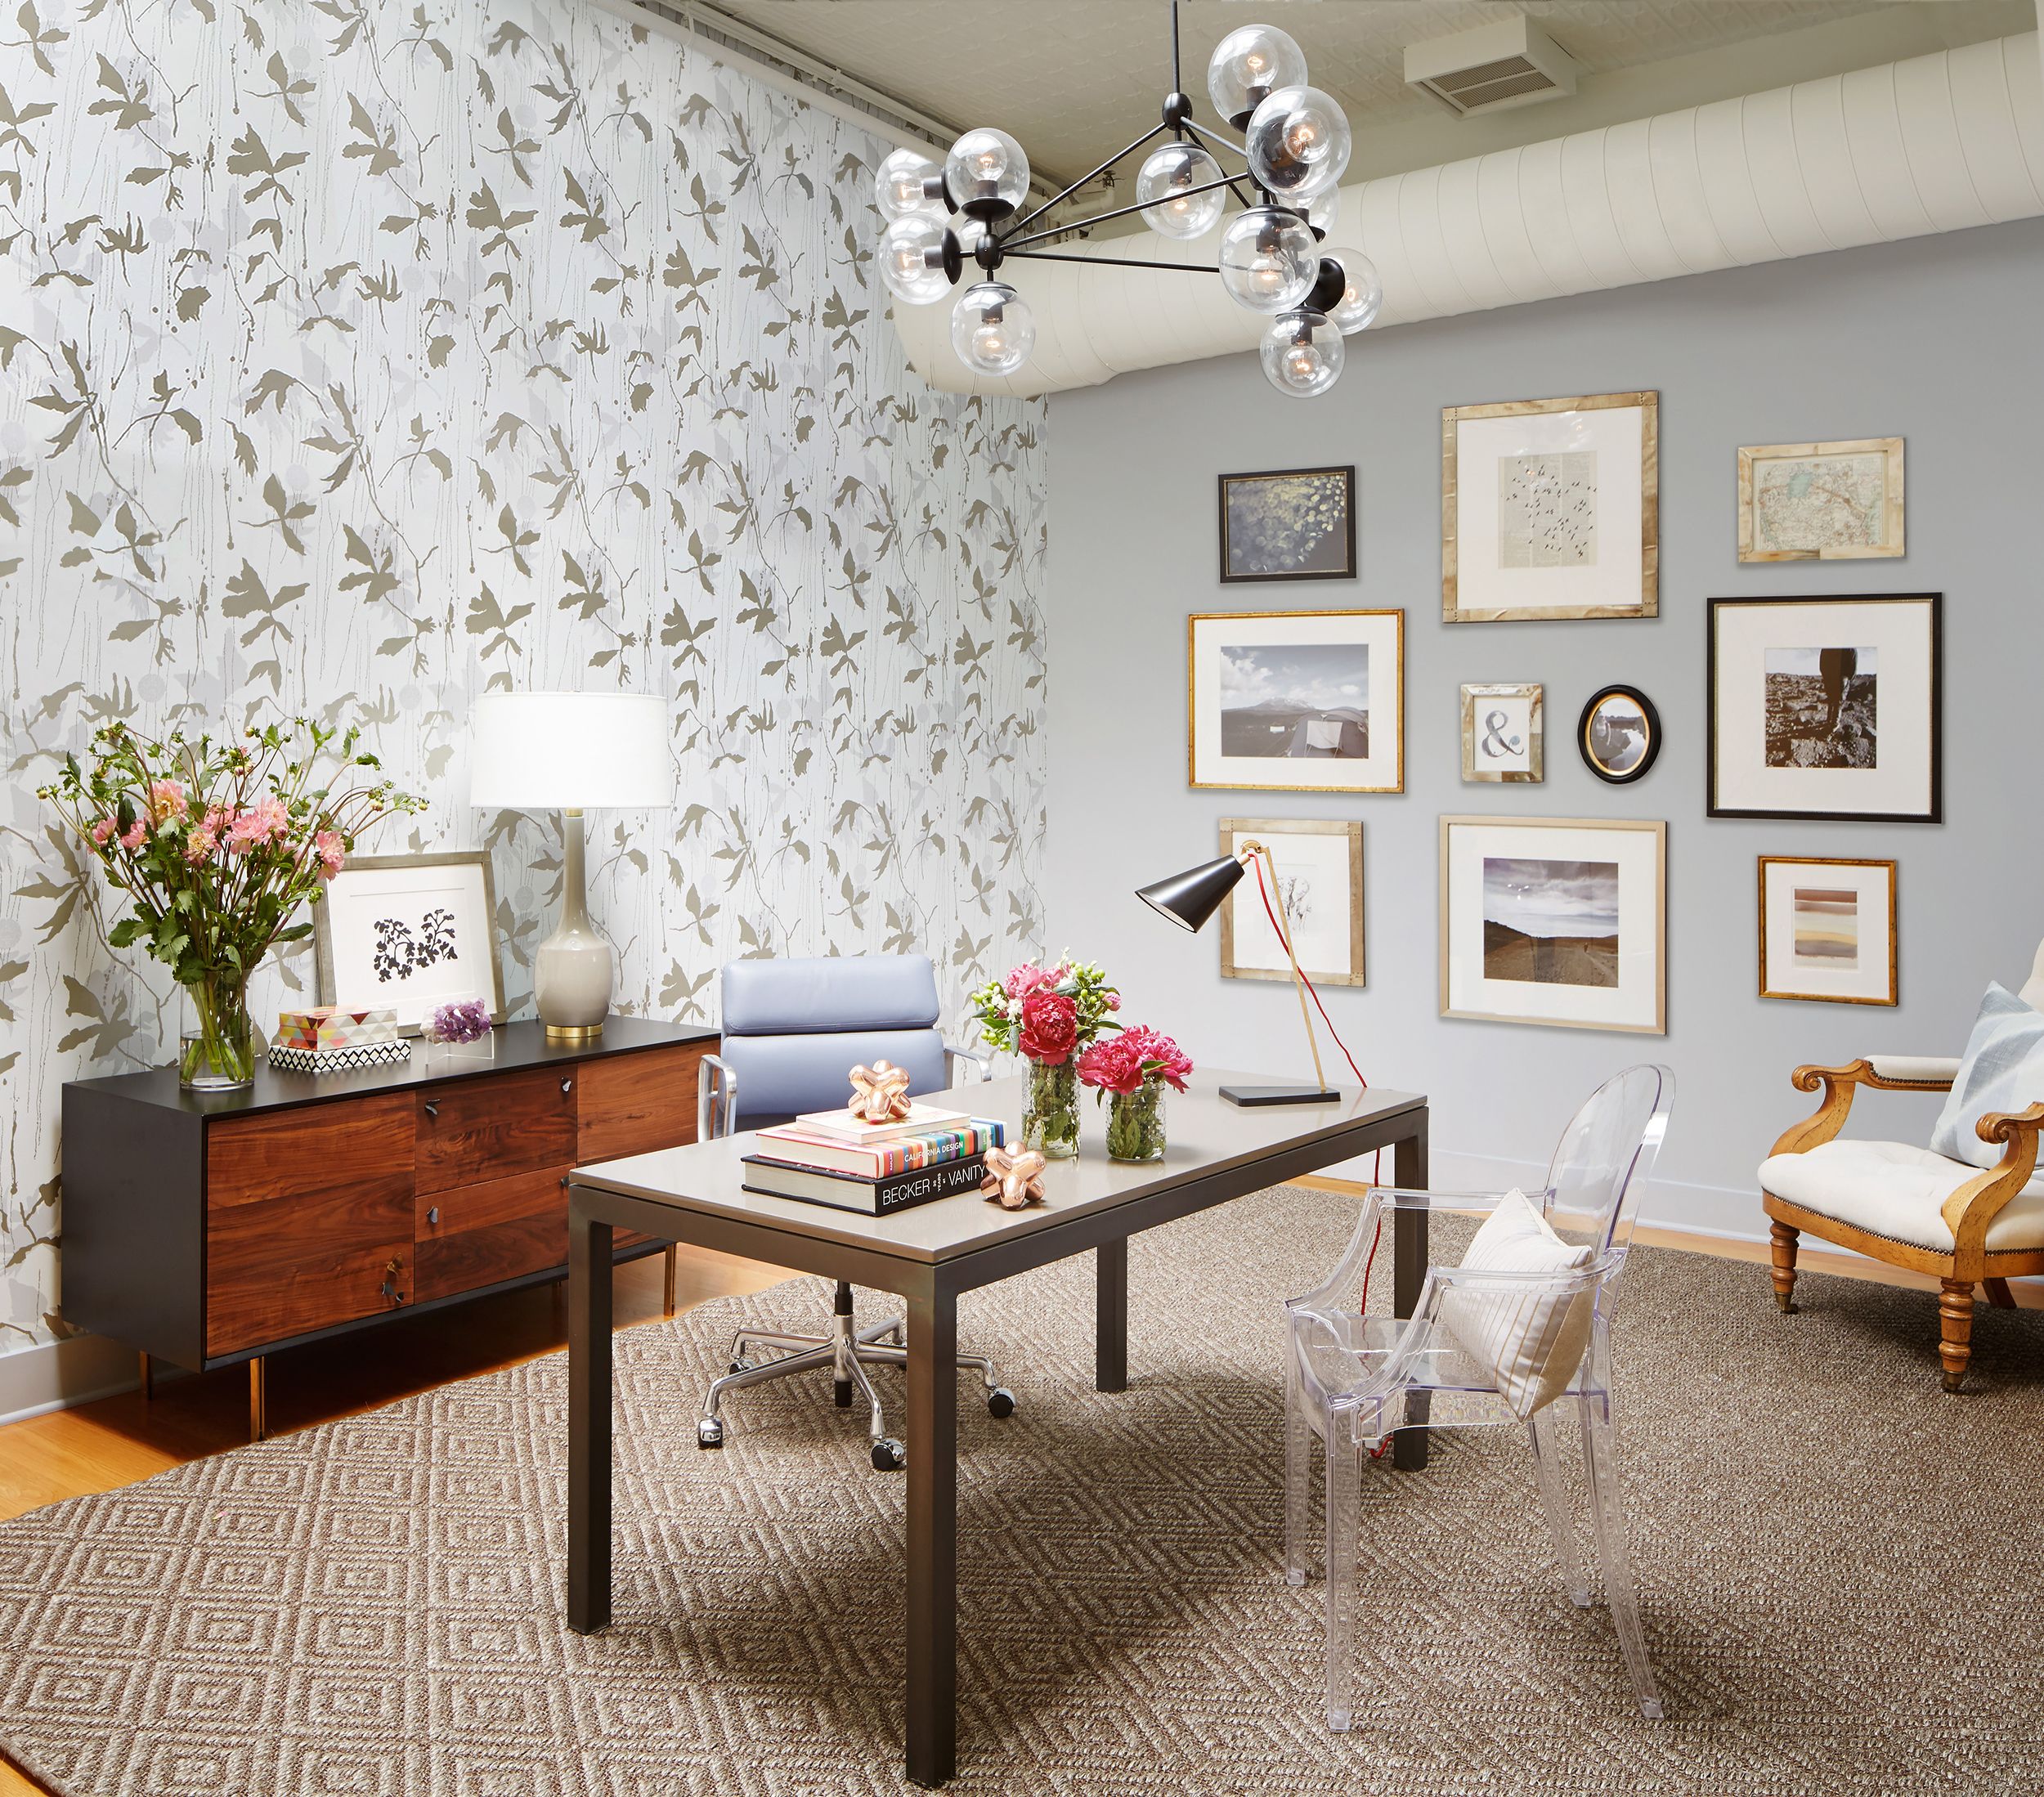 65 Bedrooms With Wallpaper Accent Walls  Shelterness